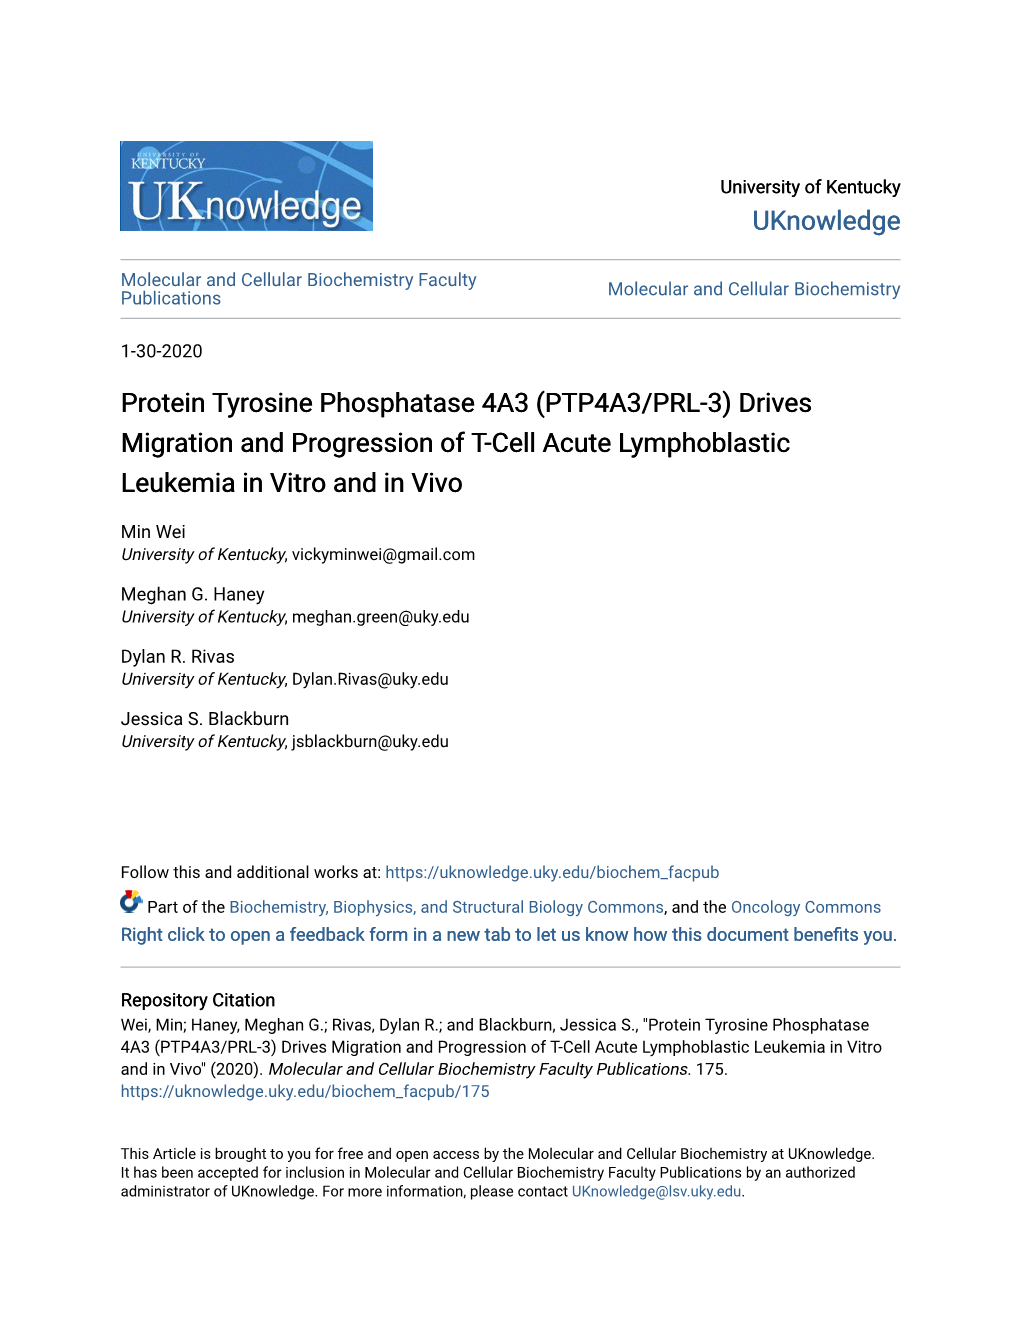 Protein Tyrosine Phosphatase 4A3 (PTP4A3/PRL-3) Drives Migration and Progression of T-Cell Acute Lymphoblastic Leukemia in Vitro and in Vivo